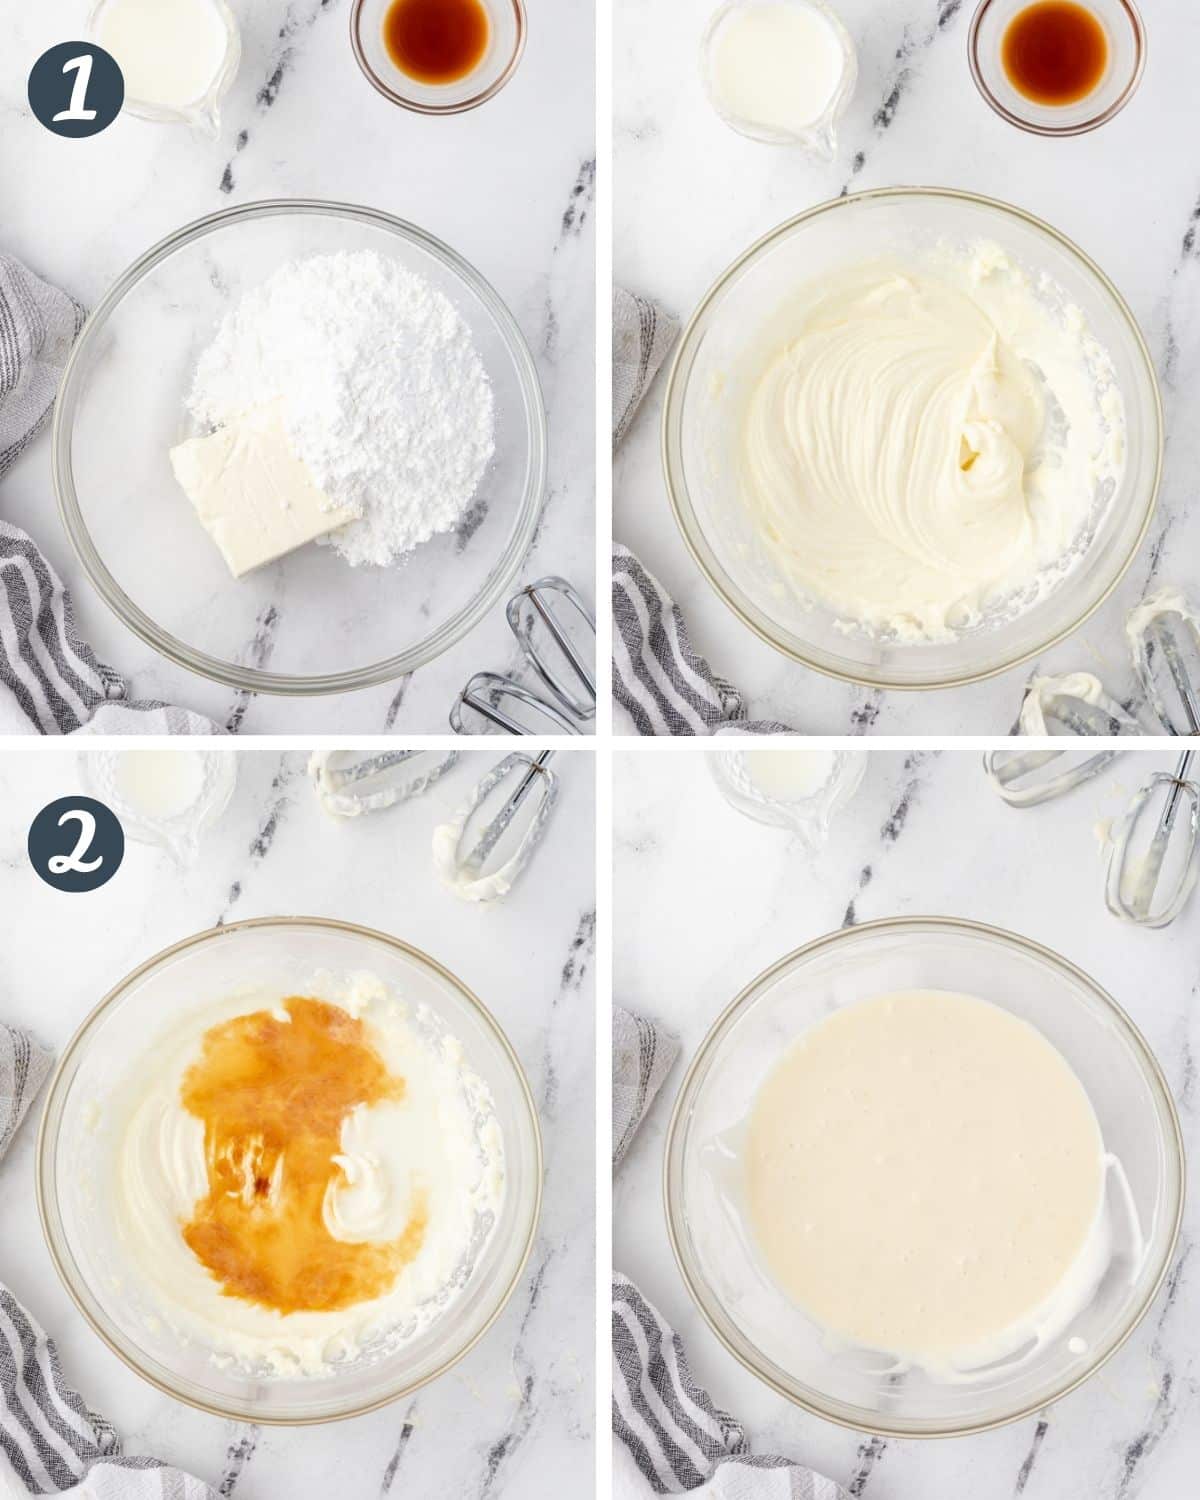 4 images showing the steps to whip cream cheese dip in a bowl.